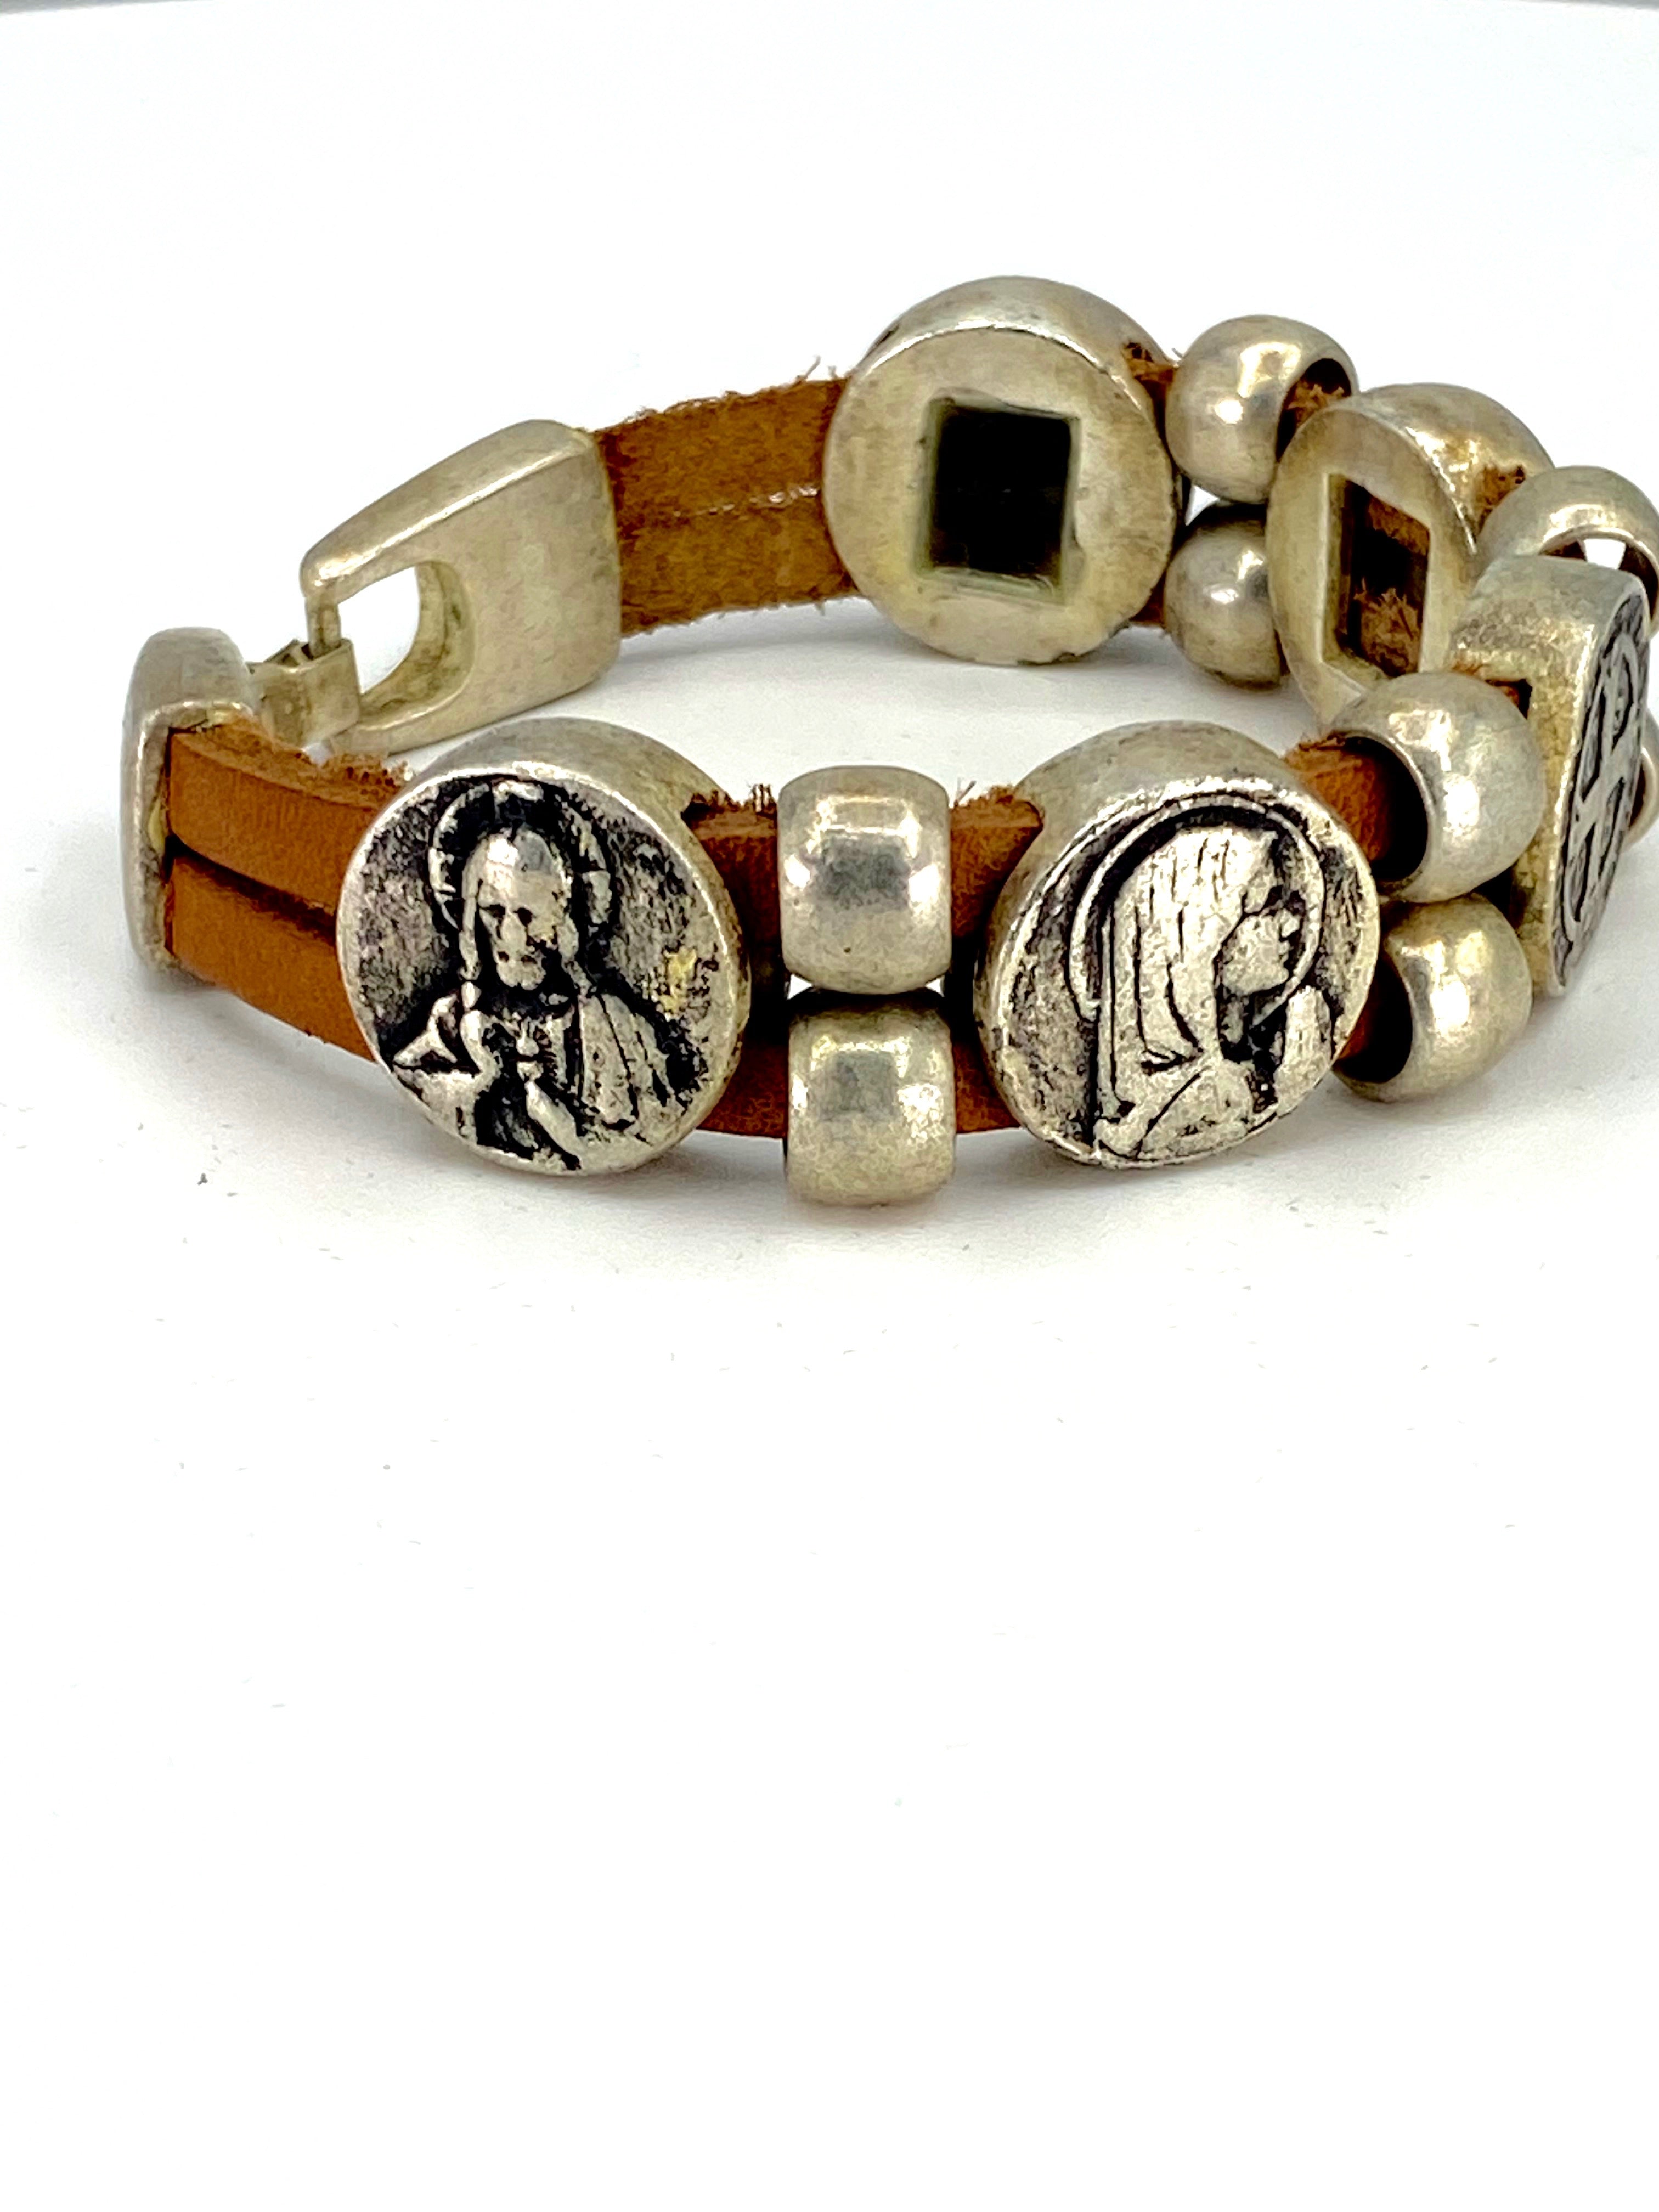 Vintage Bracelet with Double Leather Strap and Medals of The Virgen Mary, St. Benedict, Sacred Heart of Jesus, Guardian Angel, and Holy Spirit  handmade jewelry by Graciela's Collection